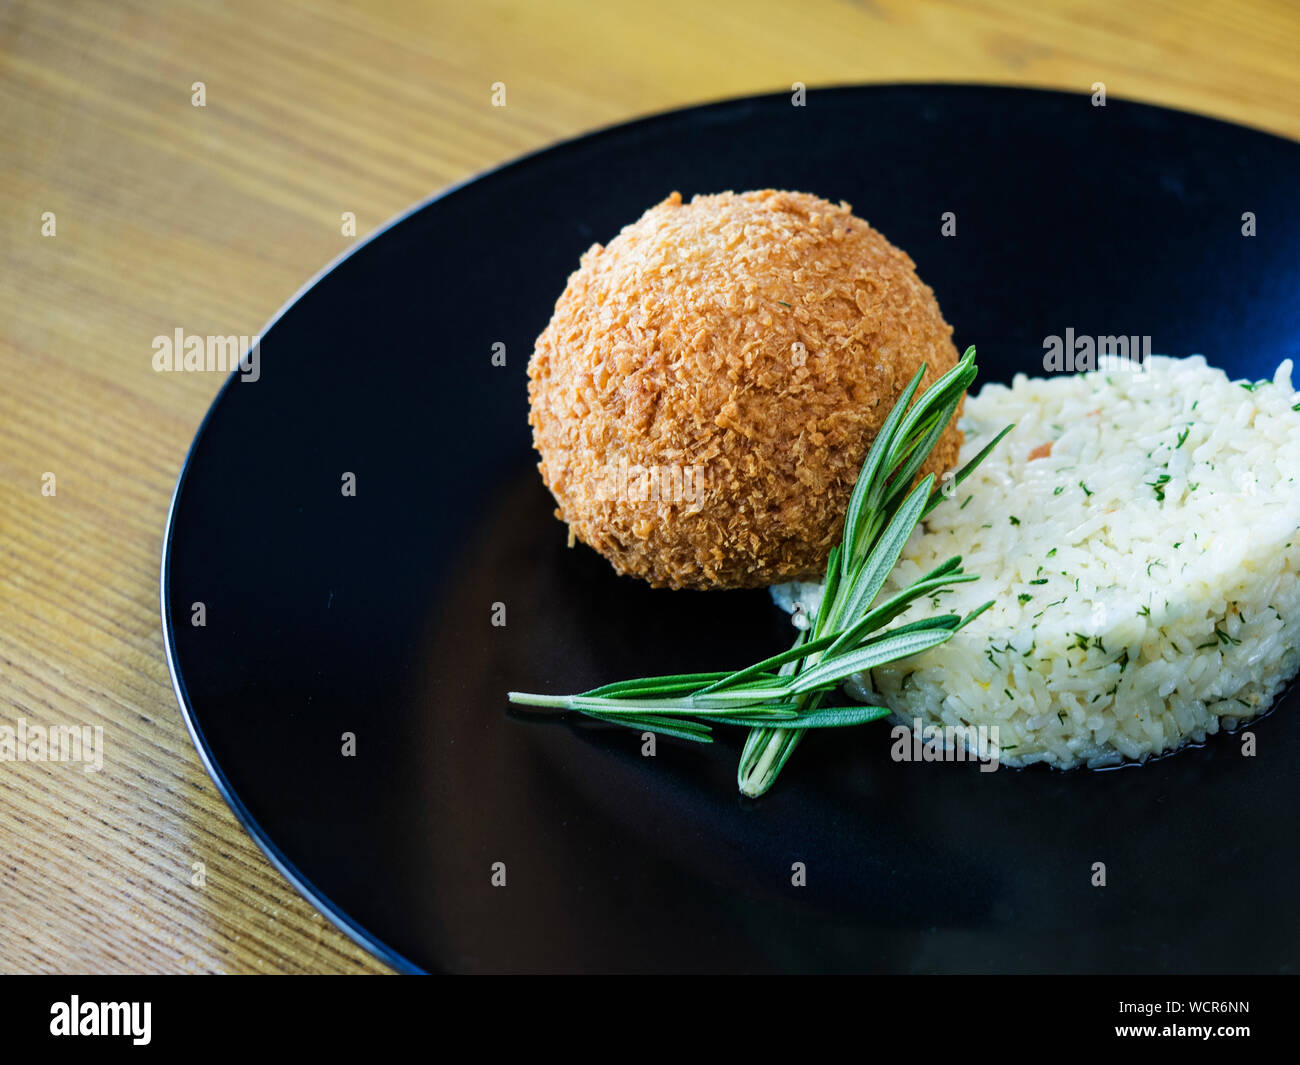 Close-up Of Stuffed Cutlet With Rice Served In Plate Stock Photo